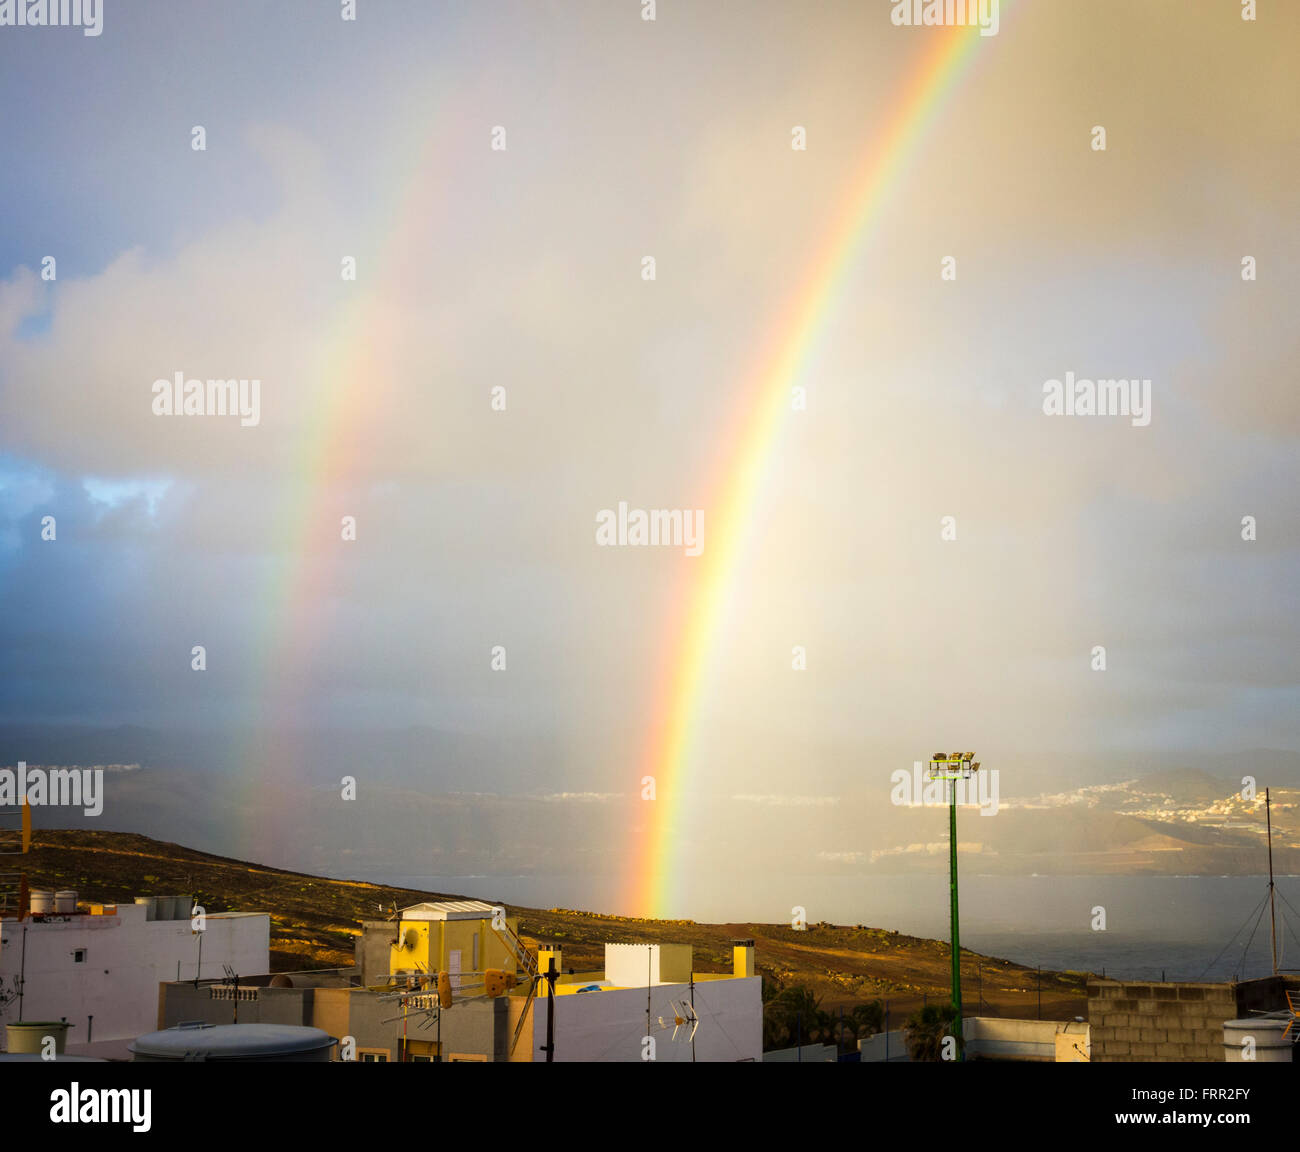 Las Palmas, Gran Canaria, Canary Islands, Spain, 24th March 2016. Weather: A double rainbow over Las Palmas, the captital of Gran Canaria at sunrise as a brief shower passes over the city on a glorious Thursday in the Canary Islands. UK press is reporting that Prime Minister David Cameron and family are flying to the Canary Islands (Lanzarote) on the 24th March for their Easter holiday. Chancellor of Germany, Angela Merkel, is also reported to be flying to one of the other Canary Islands (La Gomera) for her Easter break. Credit:  Alan Dawson News/Alamy Live News Stock Photo